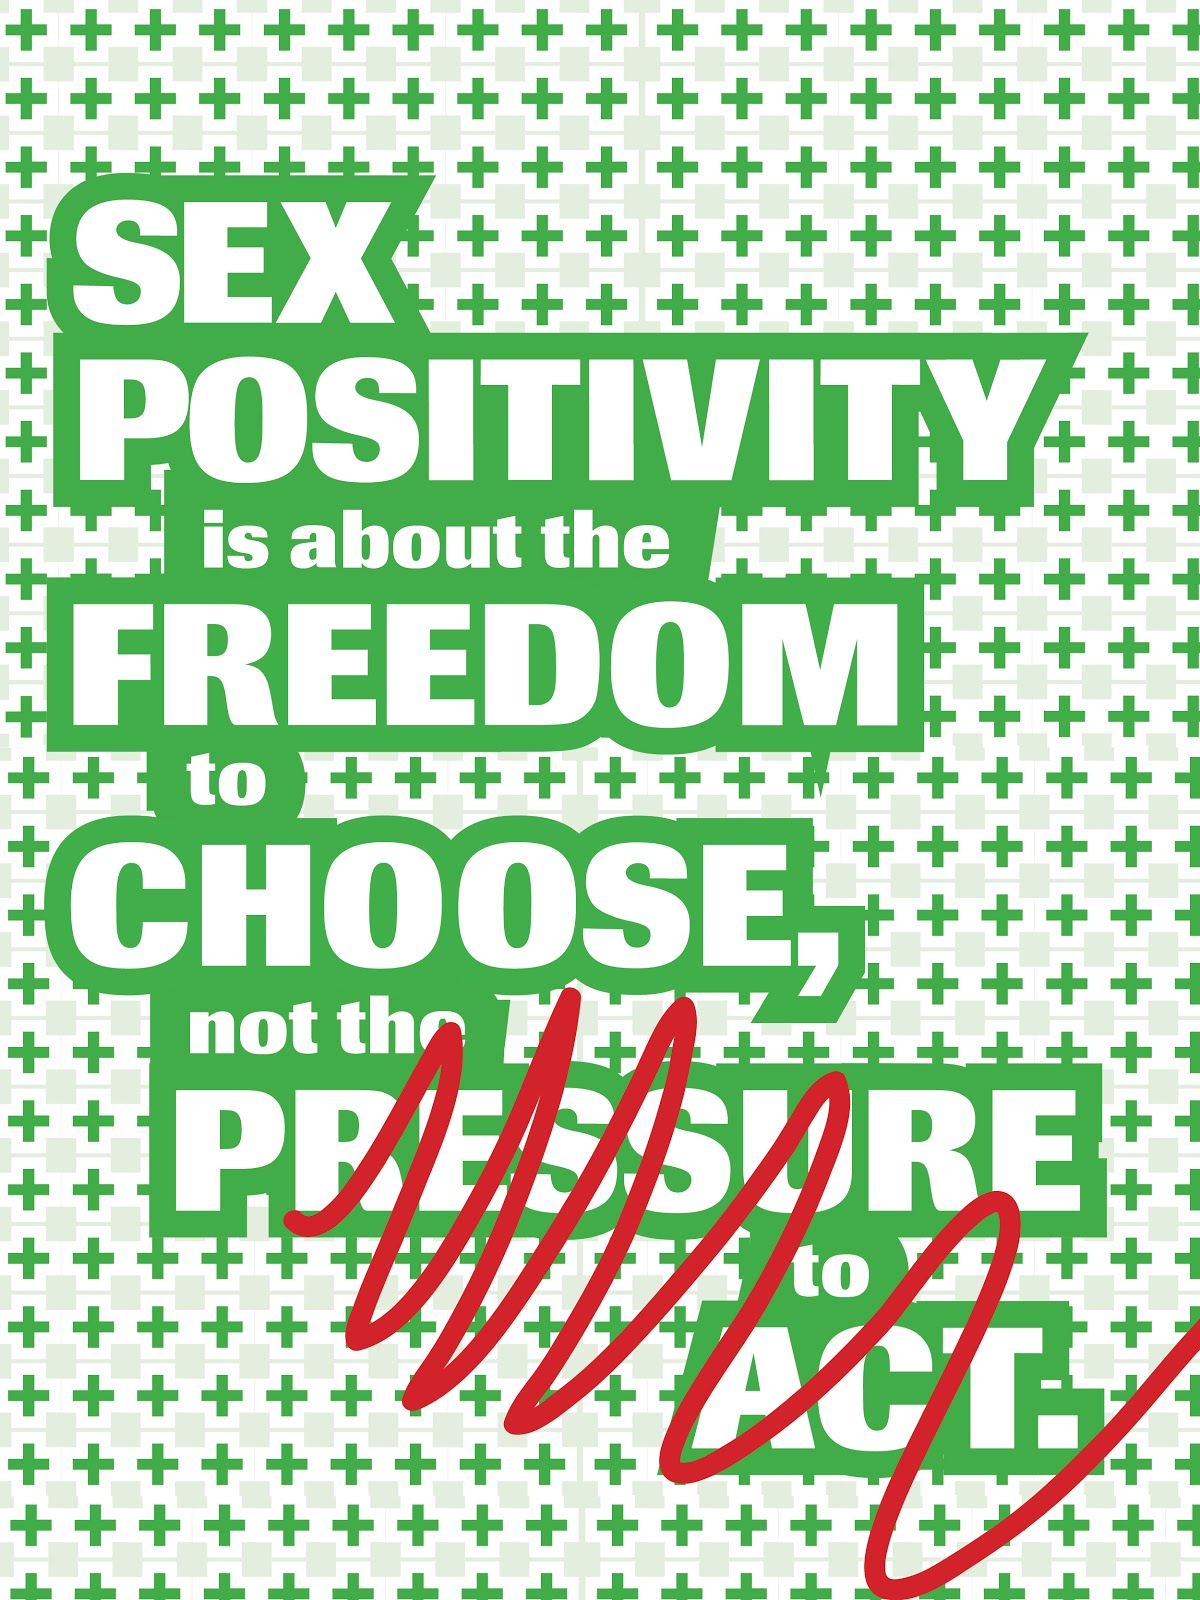 A Sexual Positivity Asexual Positivity As Sex Positivity Freedom Requires Wings 